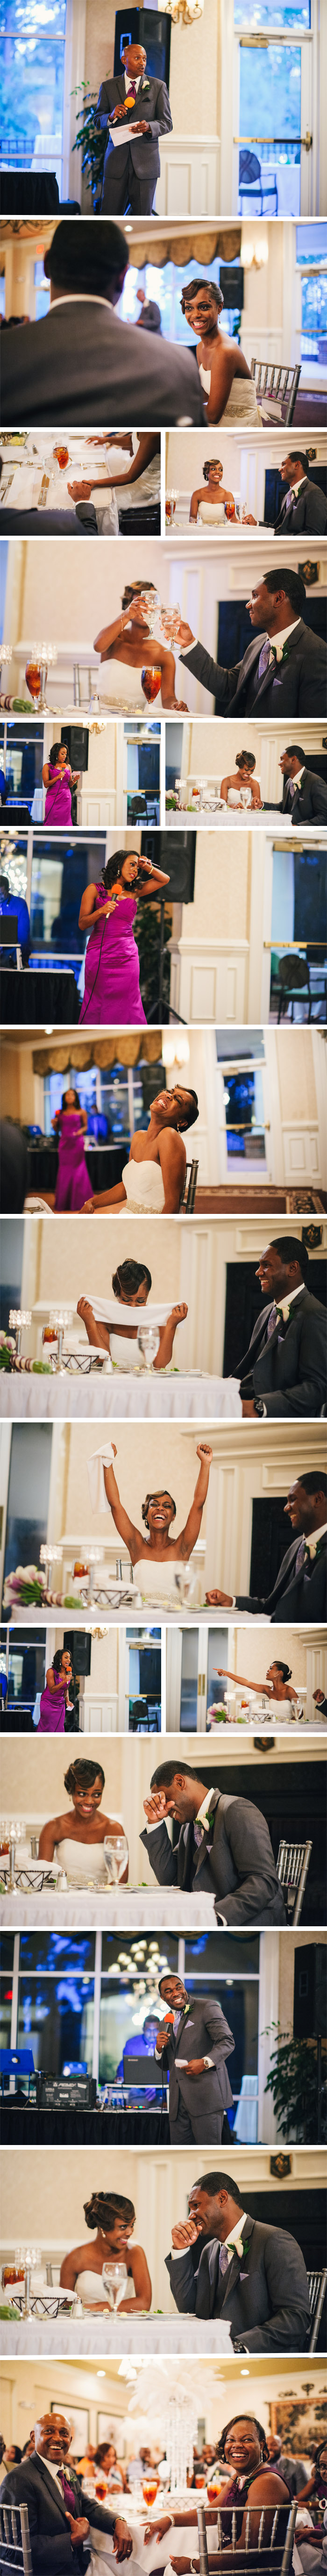 Raleigh Wedding photographer, Raleigh wedding, brier creek country club, wedding pictures